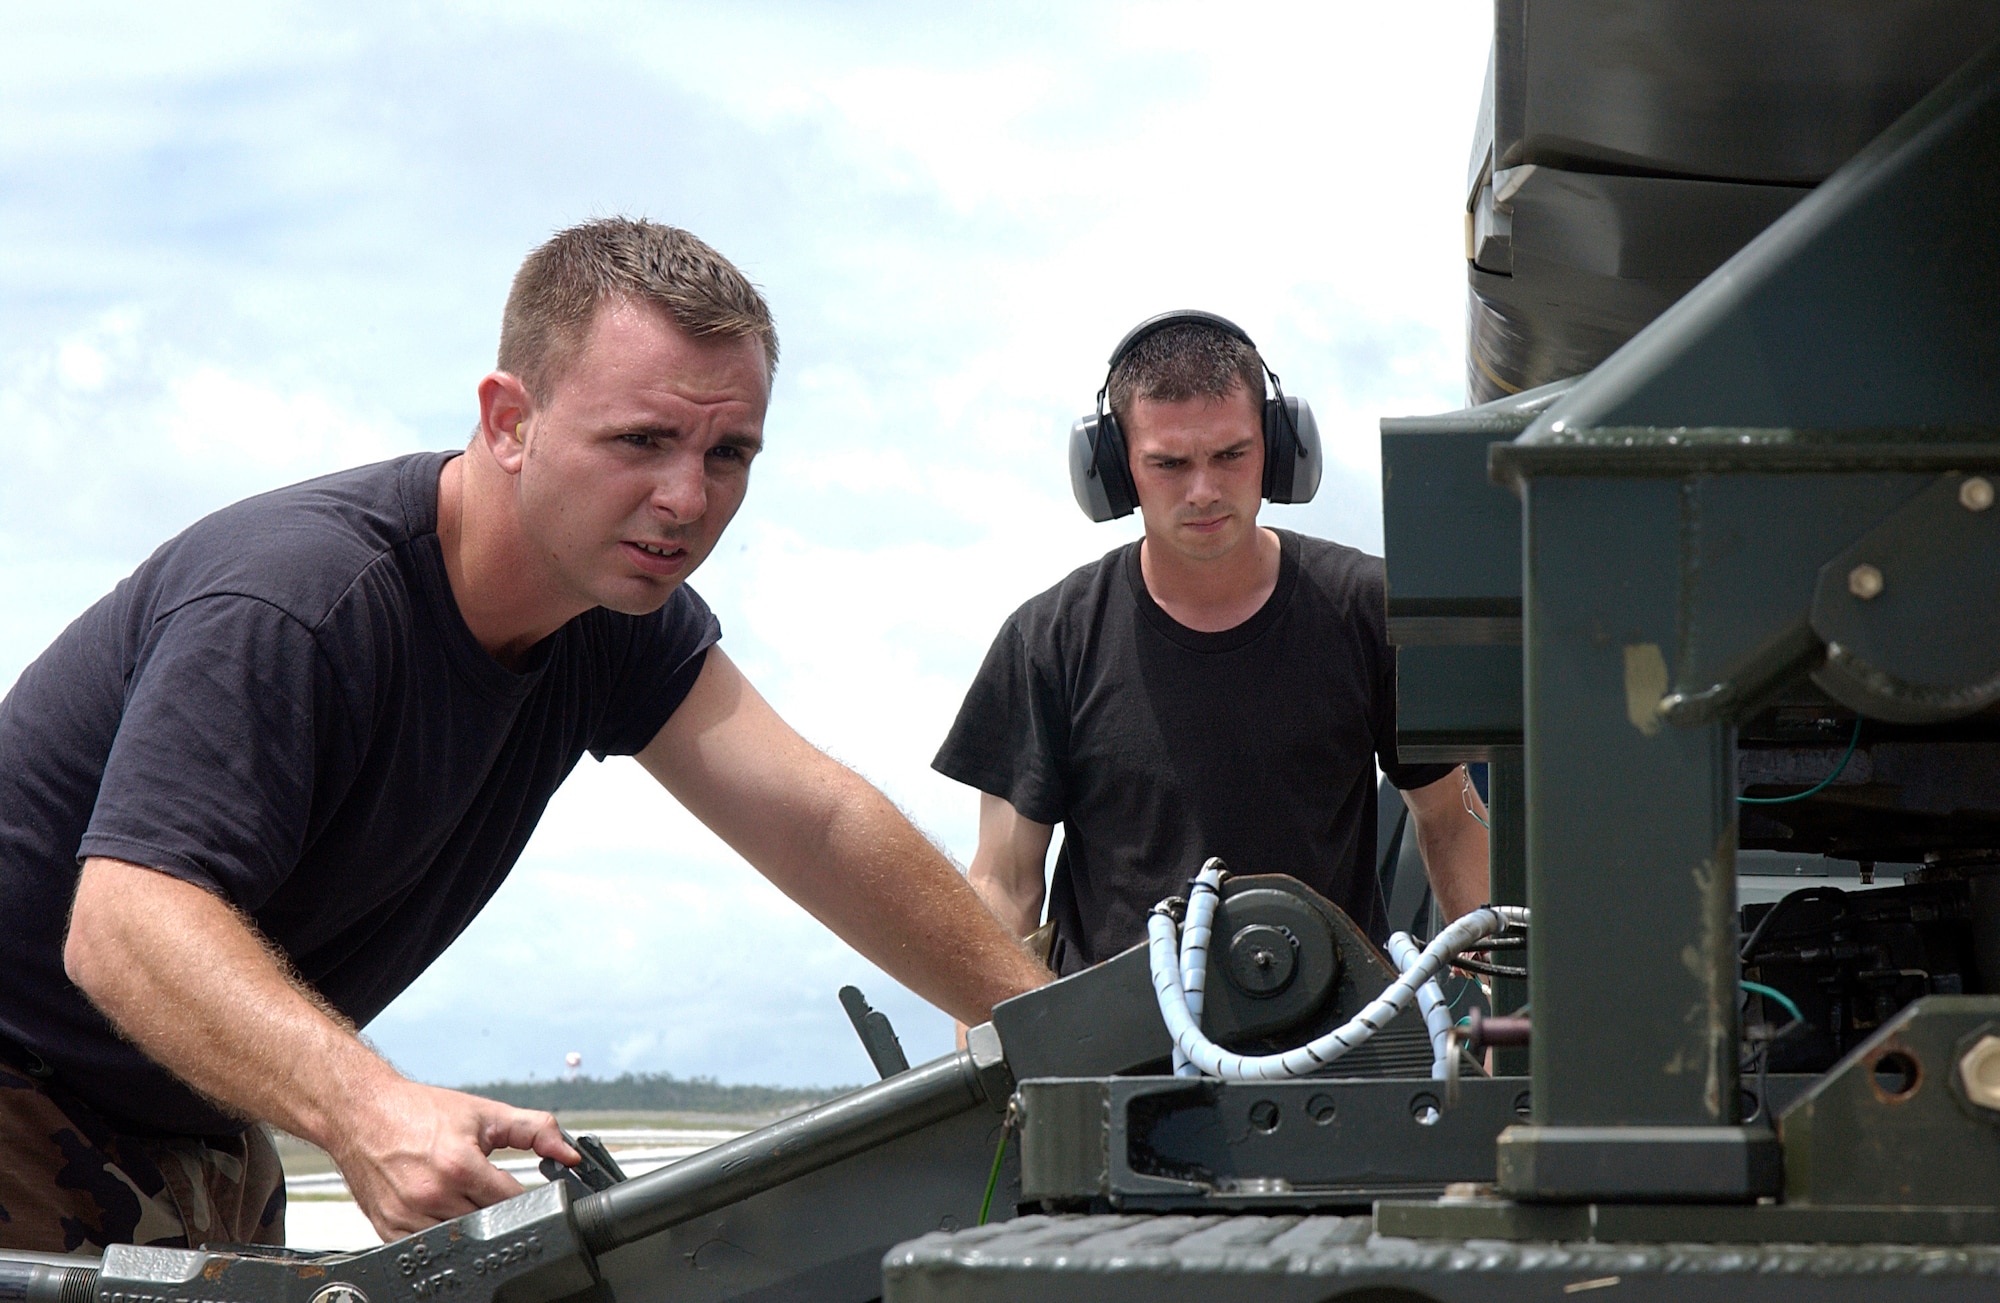 ANDERSEN AIR FORCE BASE, Guam  --  Staff Sgts. John Beldin and Landon Favors, B-52 Stratofortress weapons loaders, prepare an air-launched cruise missle for loading on a B-52 here March 20.  Aircraft and support troops from the 2nd Bomb Wing at Barksdale Air Force Base, La., are deployed as part of the 7th Air Expeditionary Wing.  (U.S. Air Force photo by Senior Airman Christina M. Rumsey)